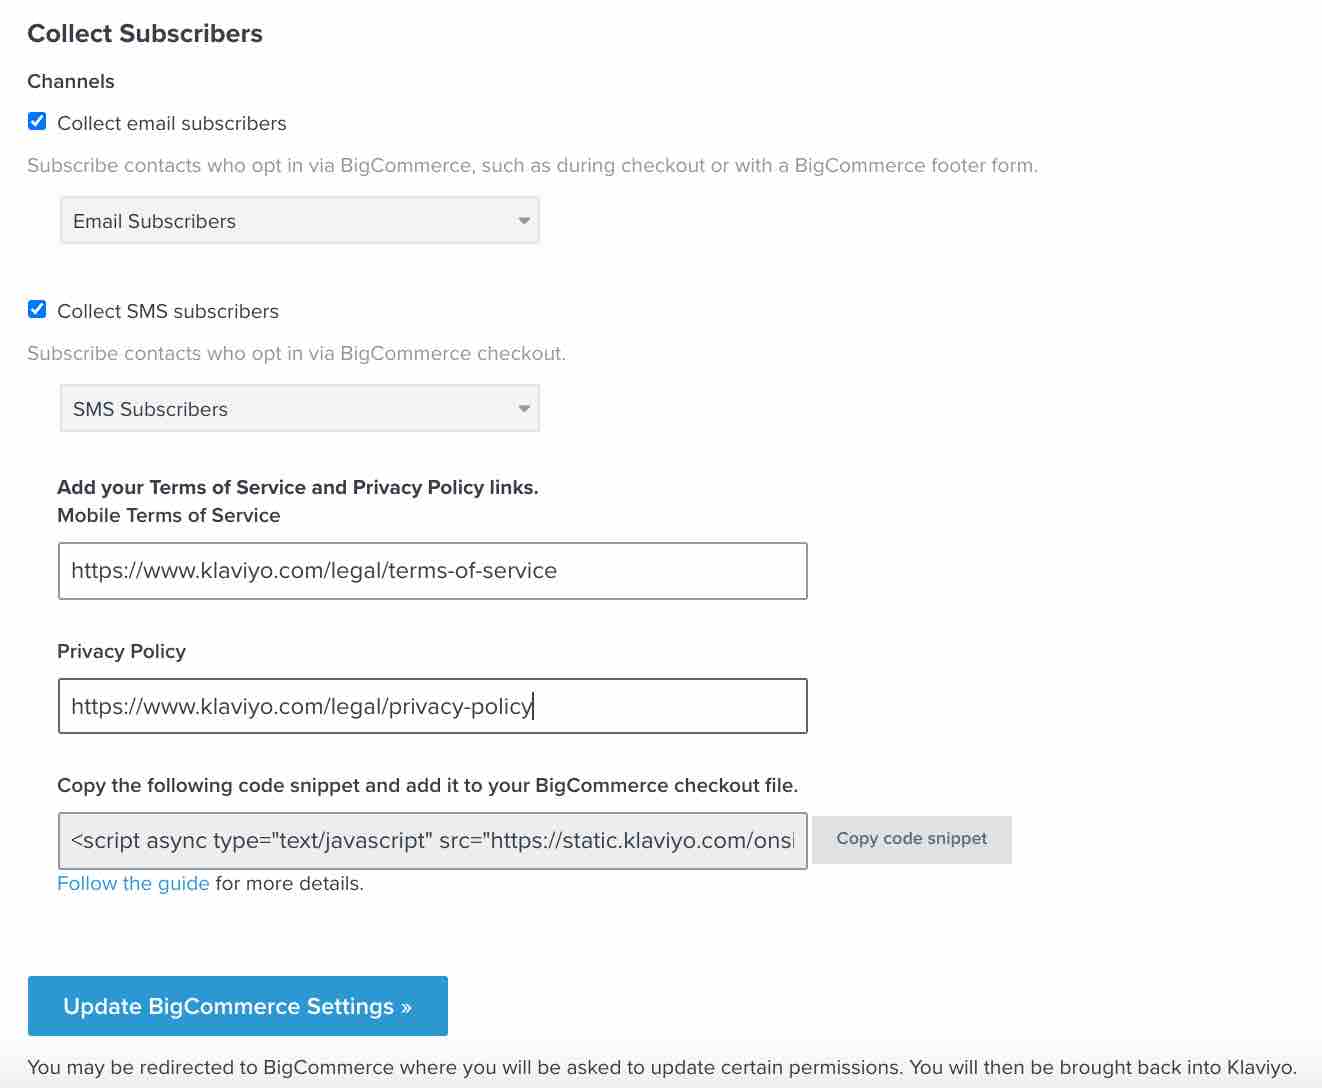 Section to add links to your mobile terms of service and privacy policy